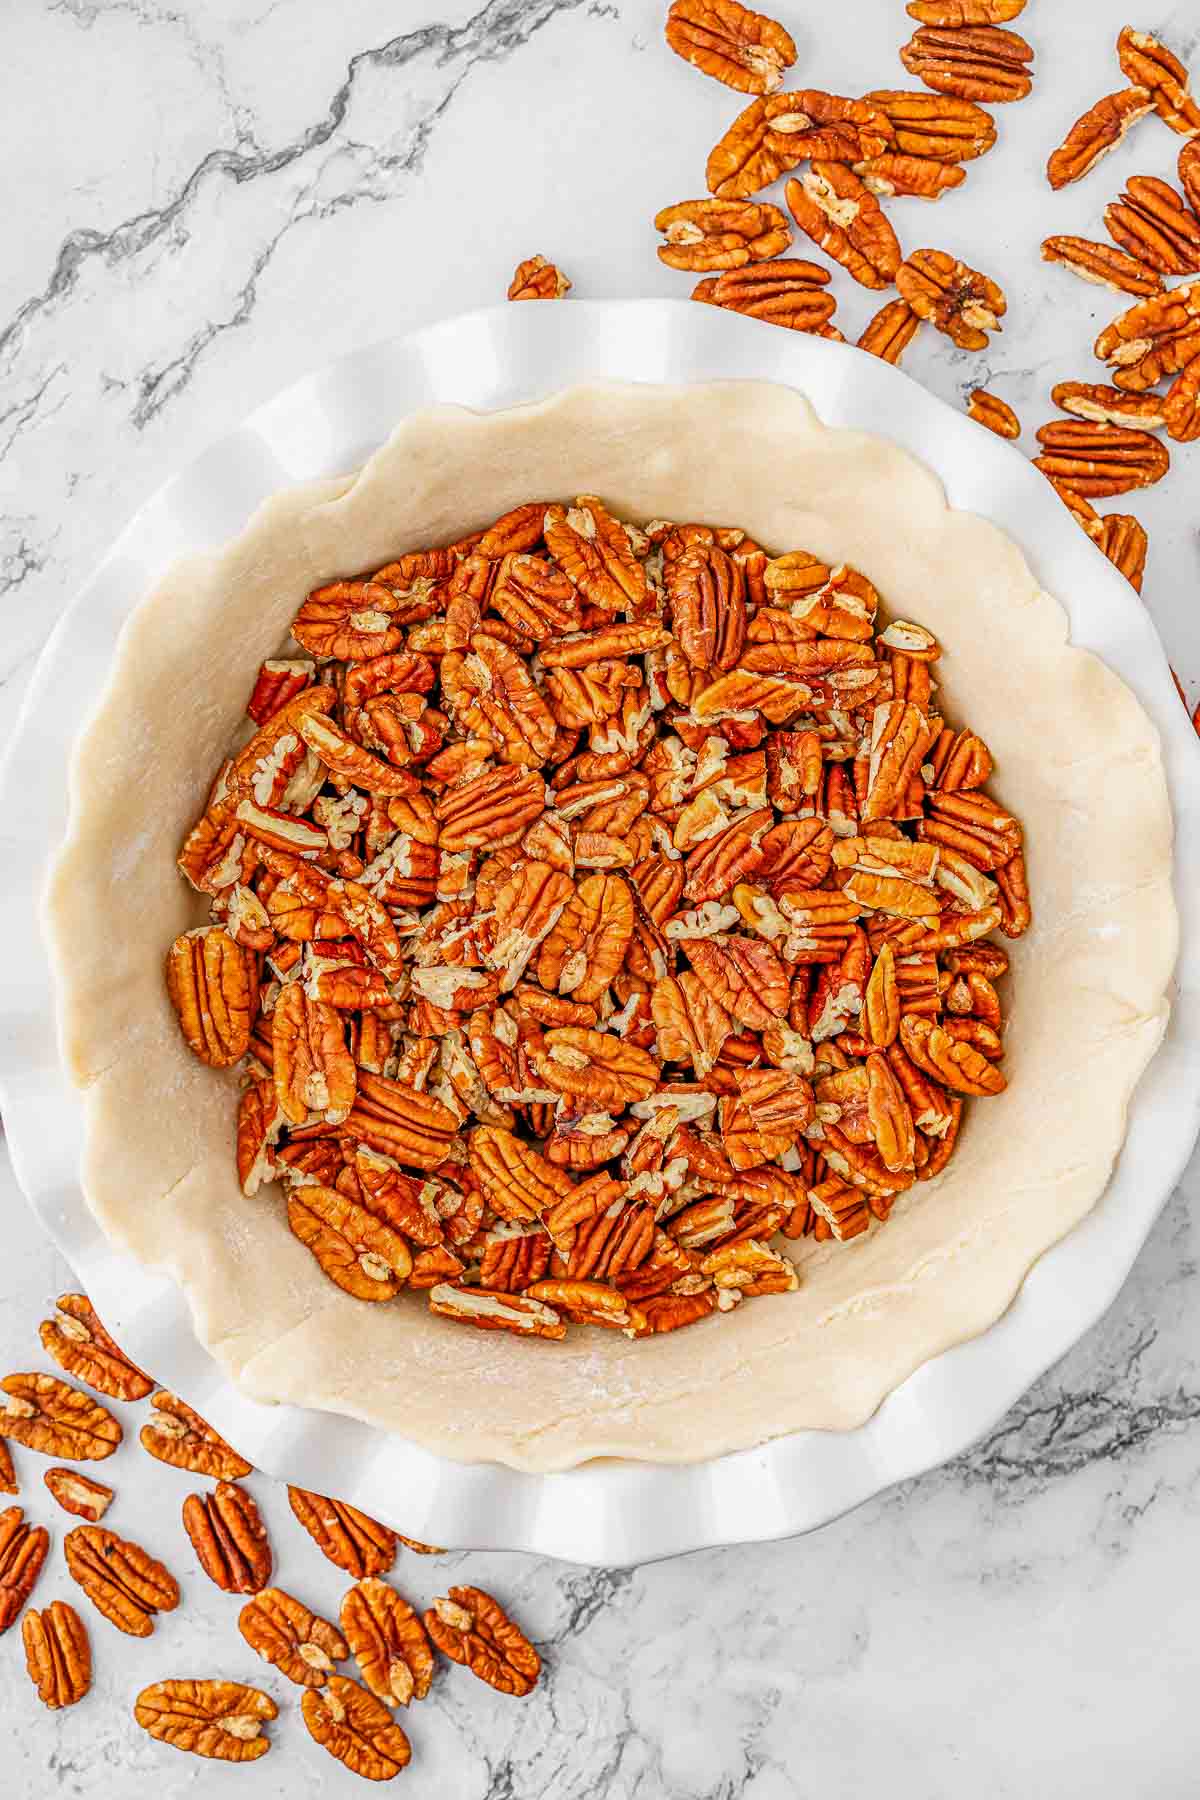 A pie crust filled with pecans on a white plate.